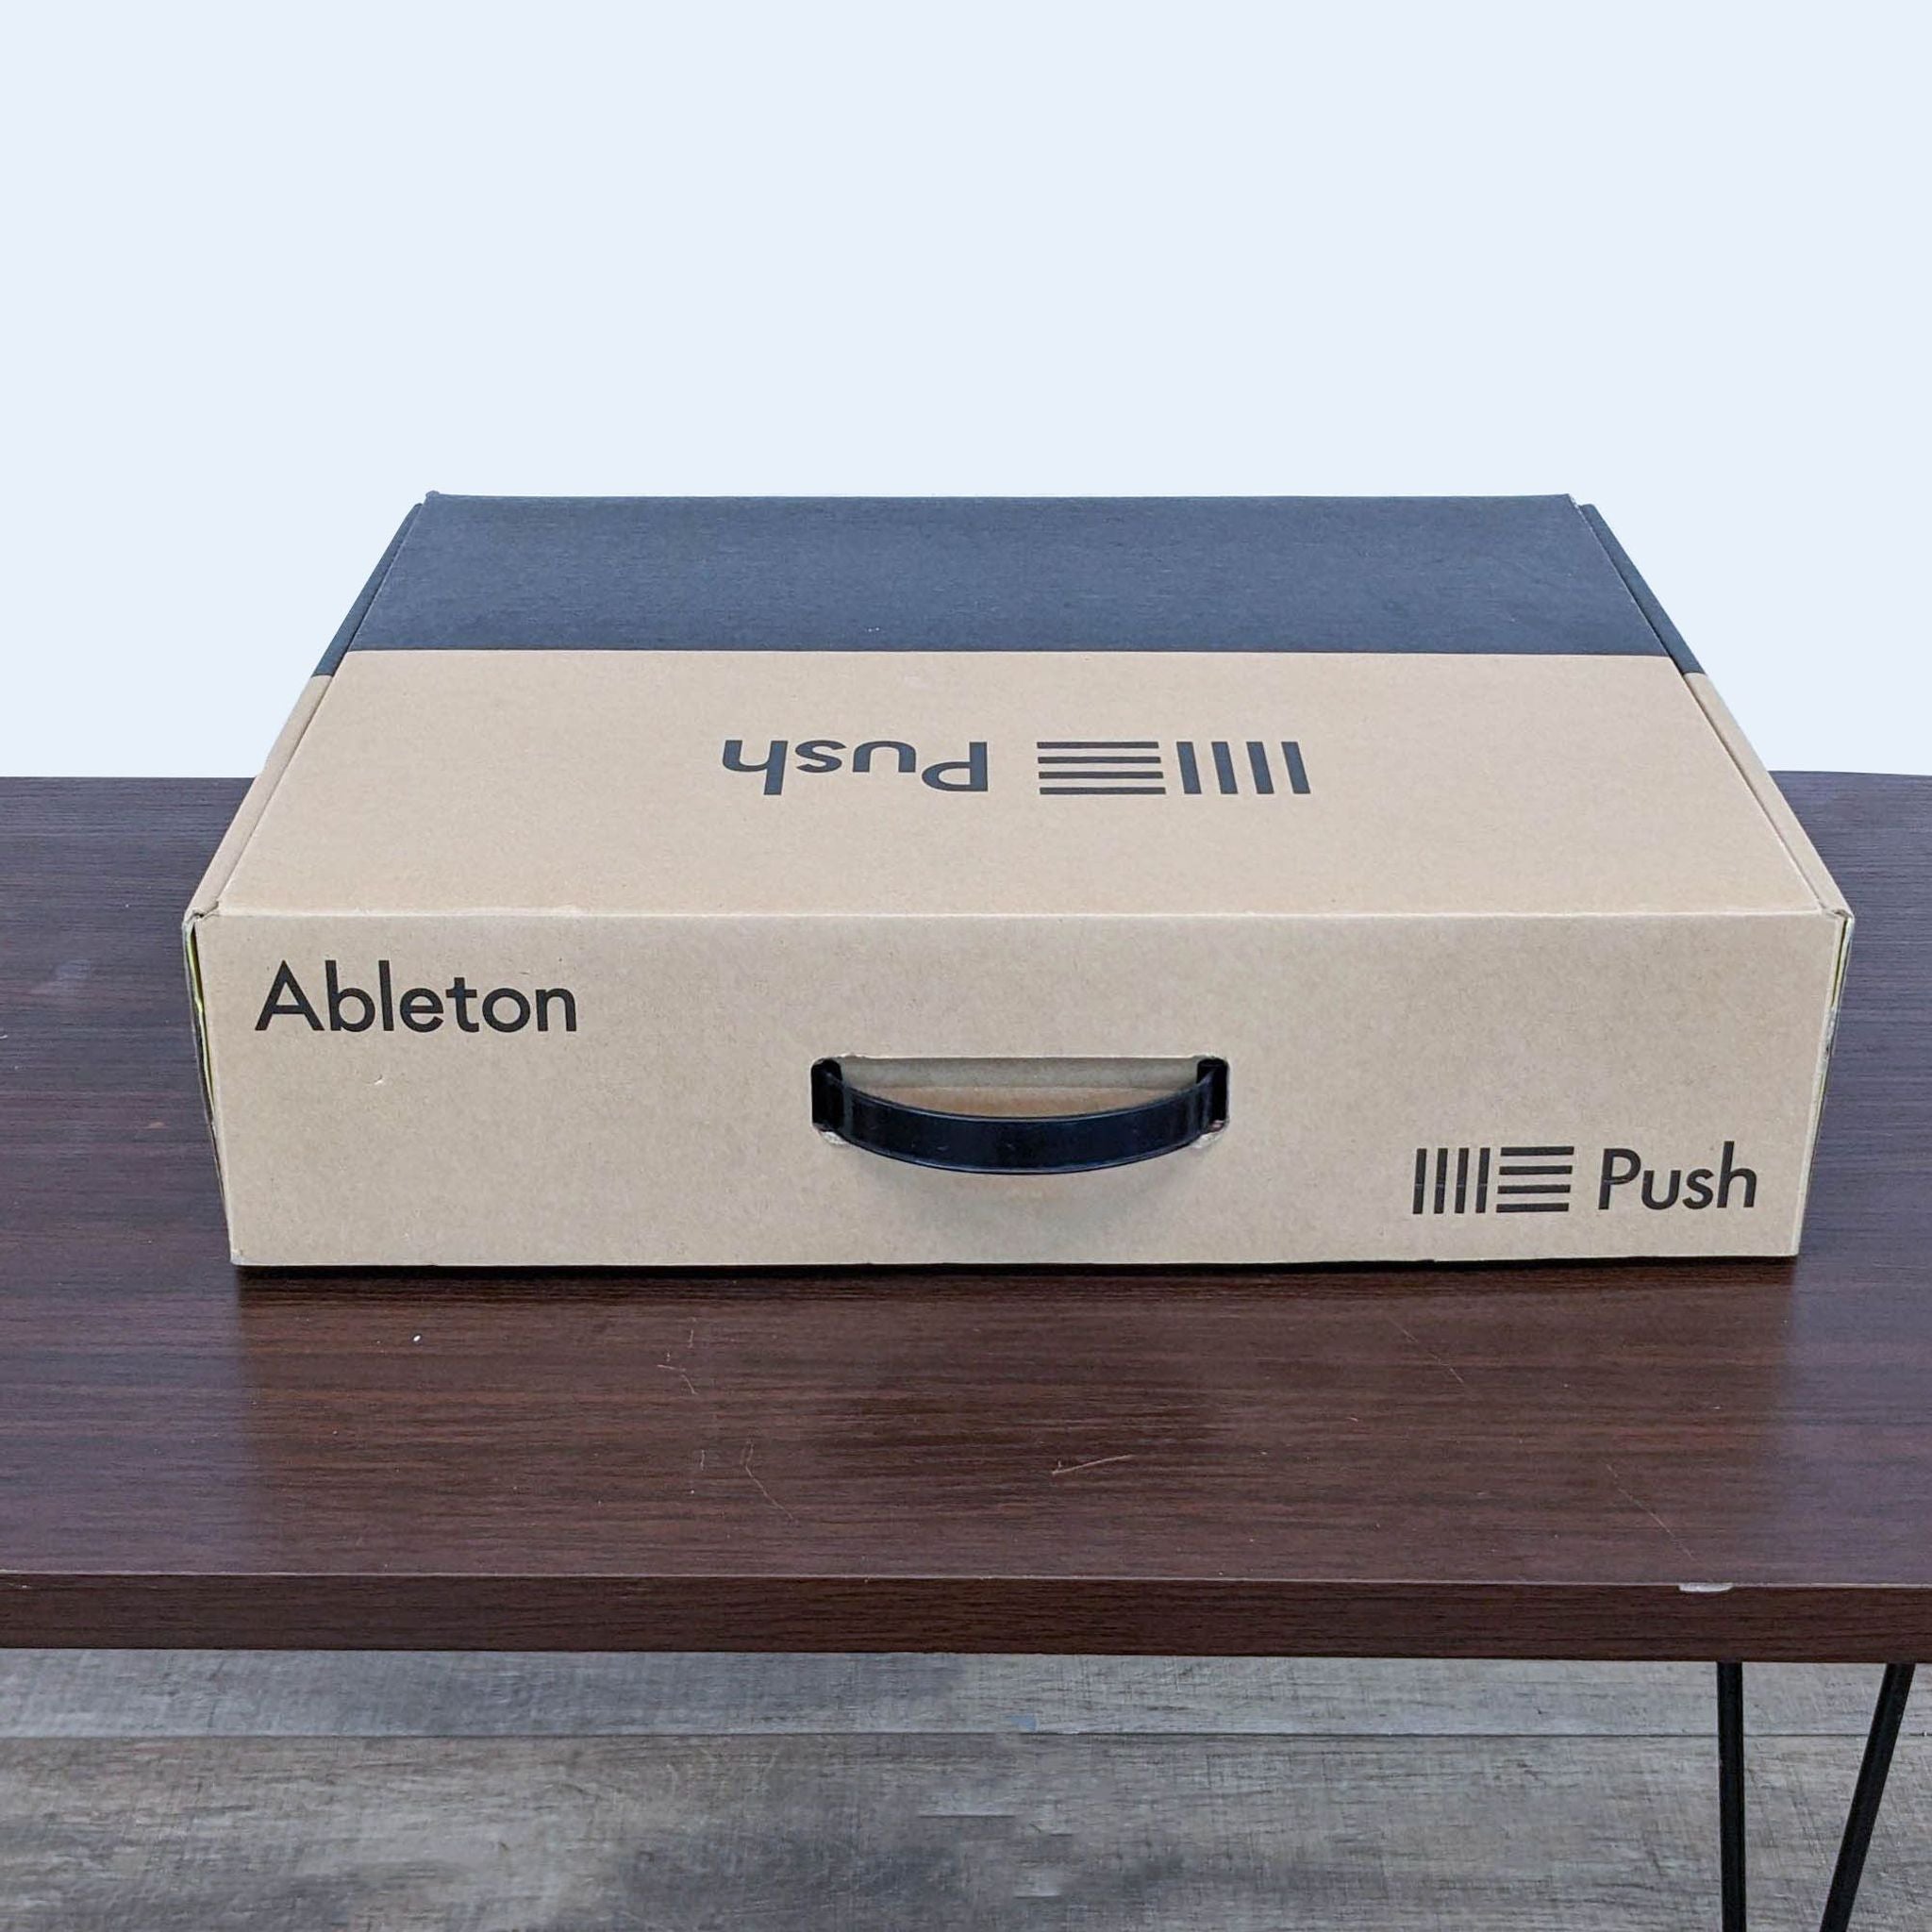 Cardboard packaging on table with "Ableton Push" label, indicating electronic music equipment inside.